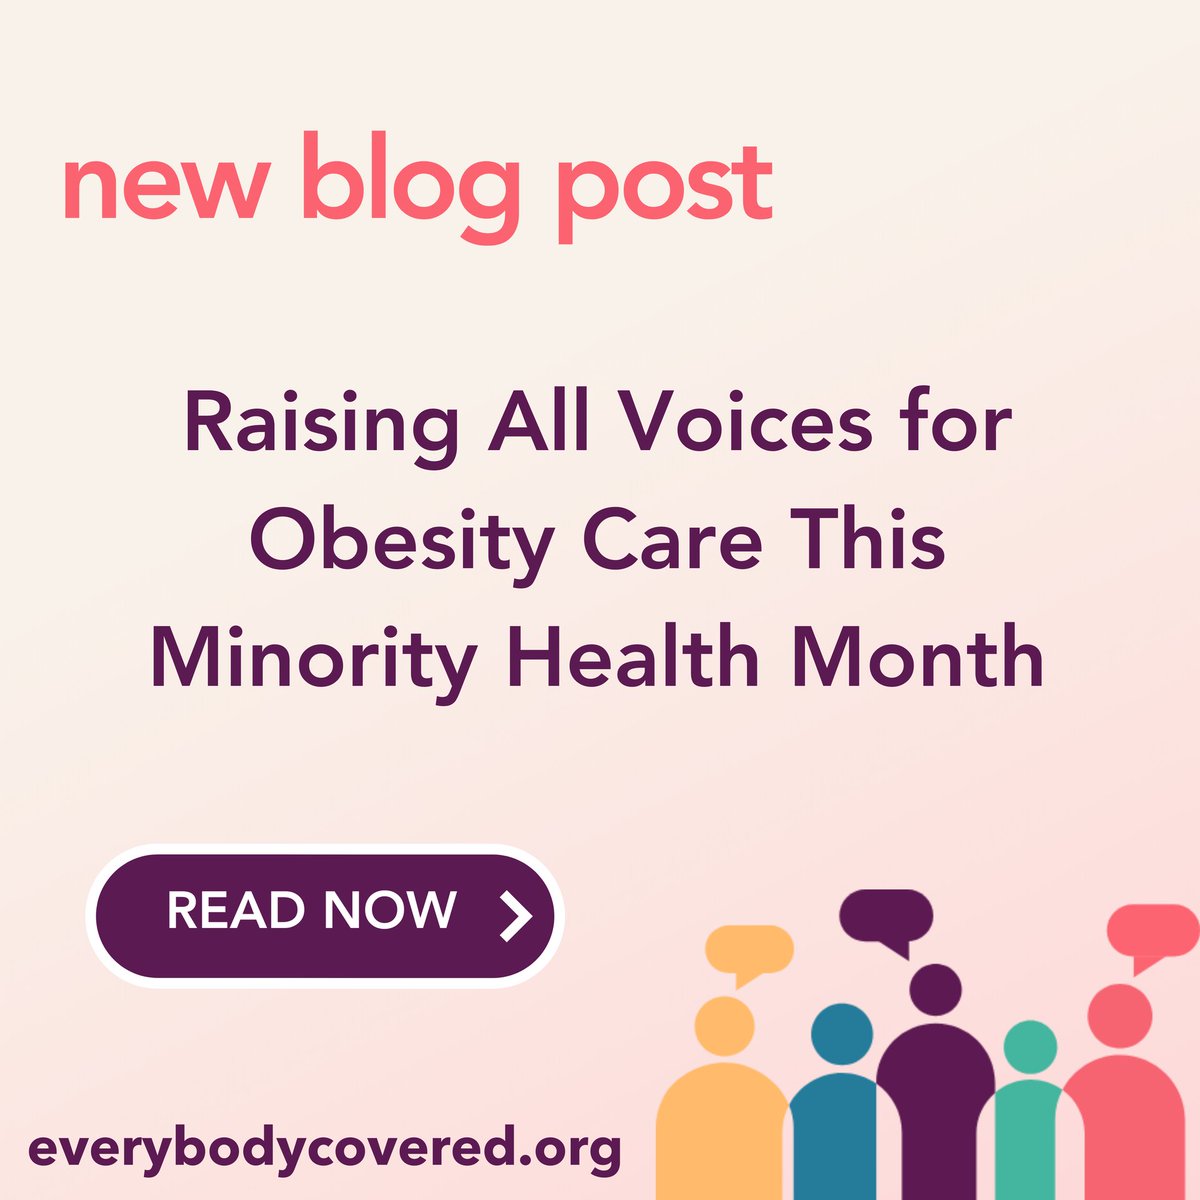 #minorityhealthmonth is an important time for all of us to underscore our commitment to closing persistent health disparities that impact communities of color, including obesity. Read our new blog post: everybodycovered.org/news-resources… #everyBODYcovered @everybodycvrd